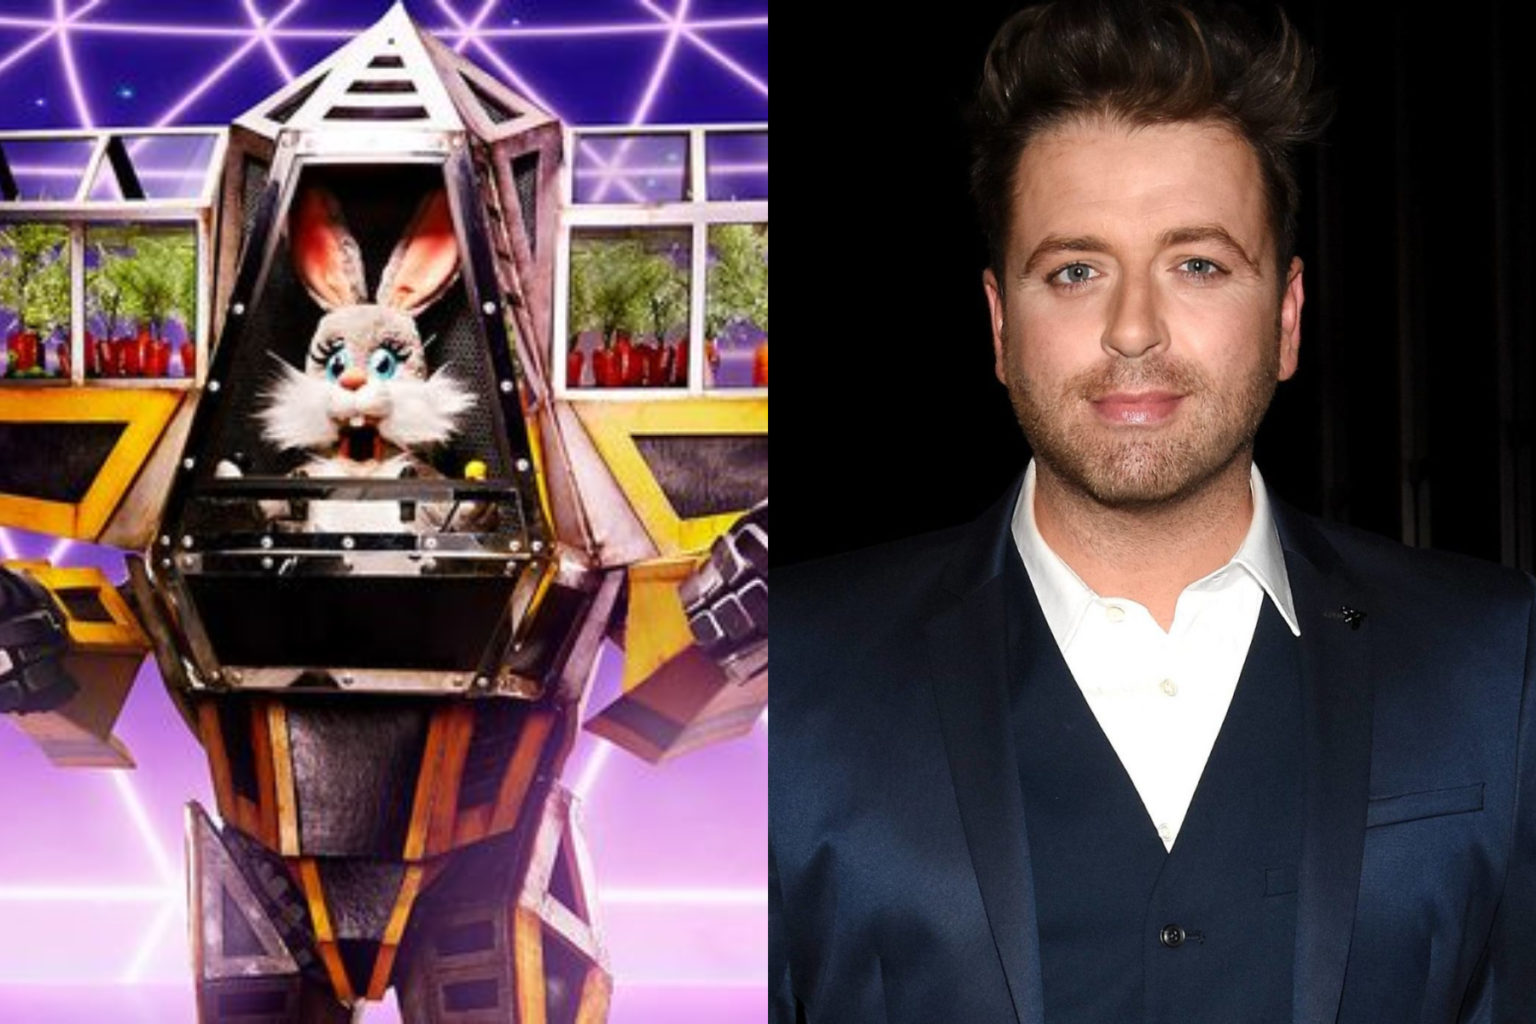 The Masked Singer UK fans are 100% sure Robobunny is Mark Feehily